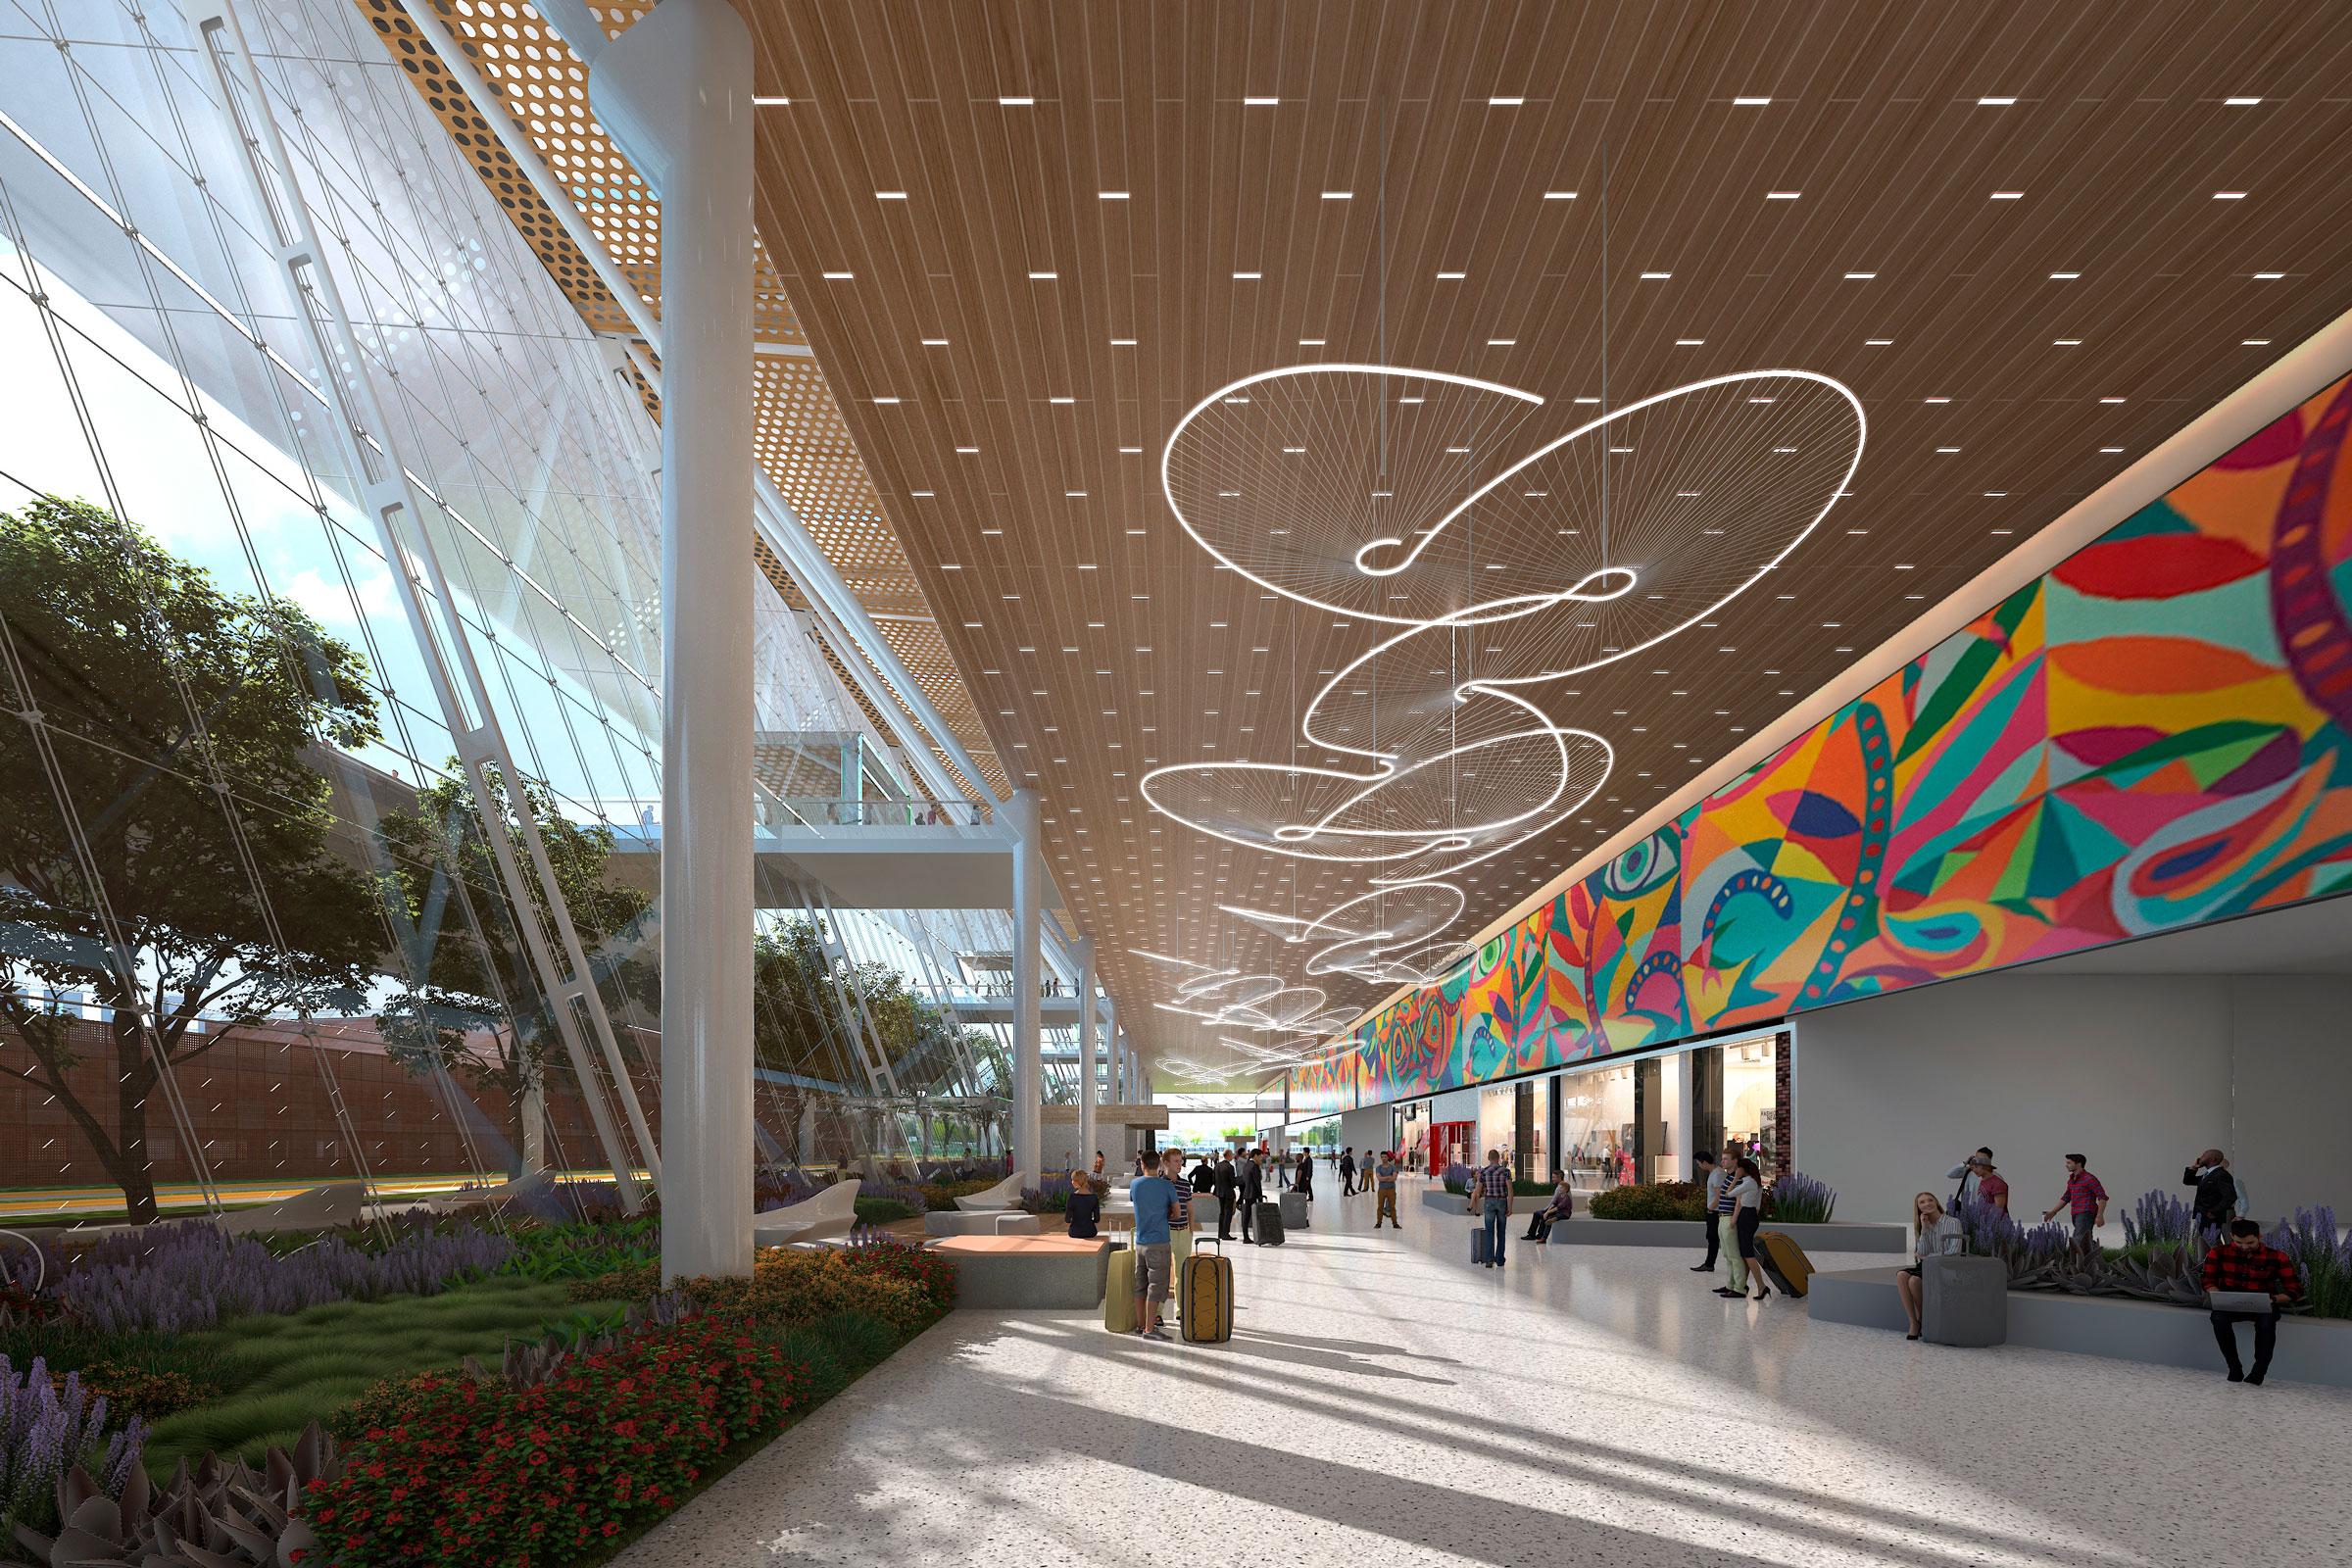 Airport Design Strategies That Make for a Less Stressful Departure